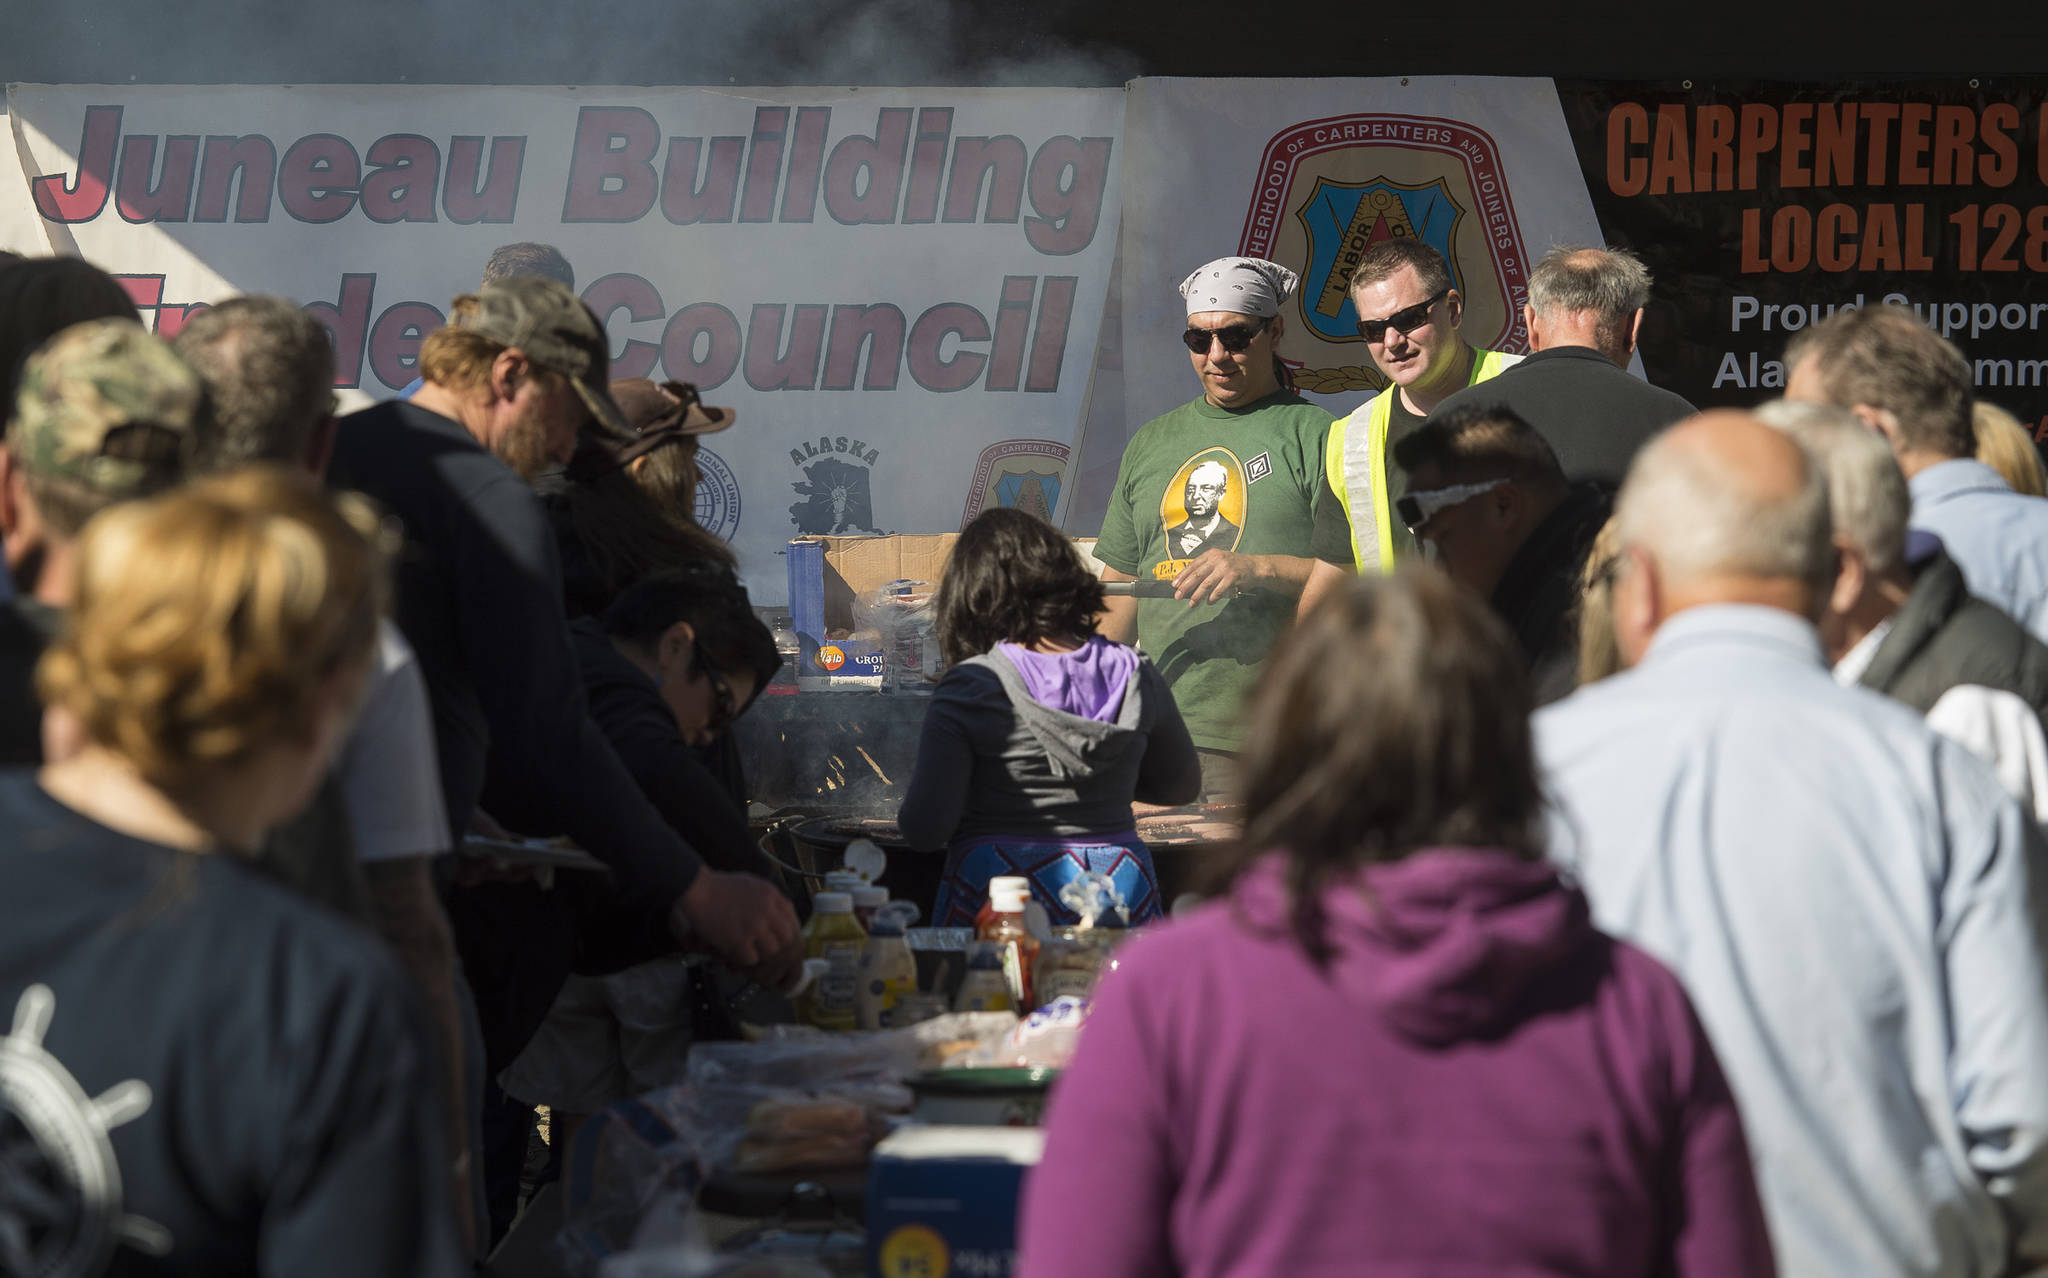 Local union members Kirk Perisch, left, Corey Baxter cook hot dogs and hamburgers for those attending the Labor Day picnic at Sandy Beach on Monday, Sept. 3, 2018. (Michael Penn | Juneau Empire)